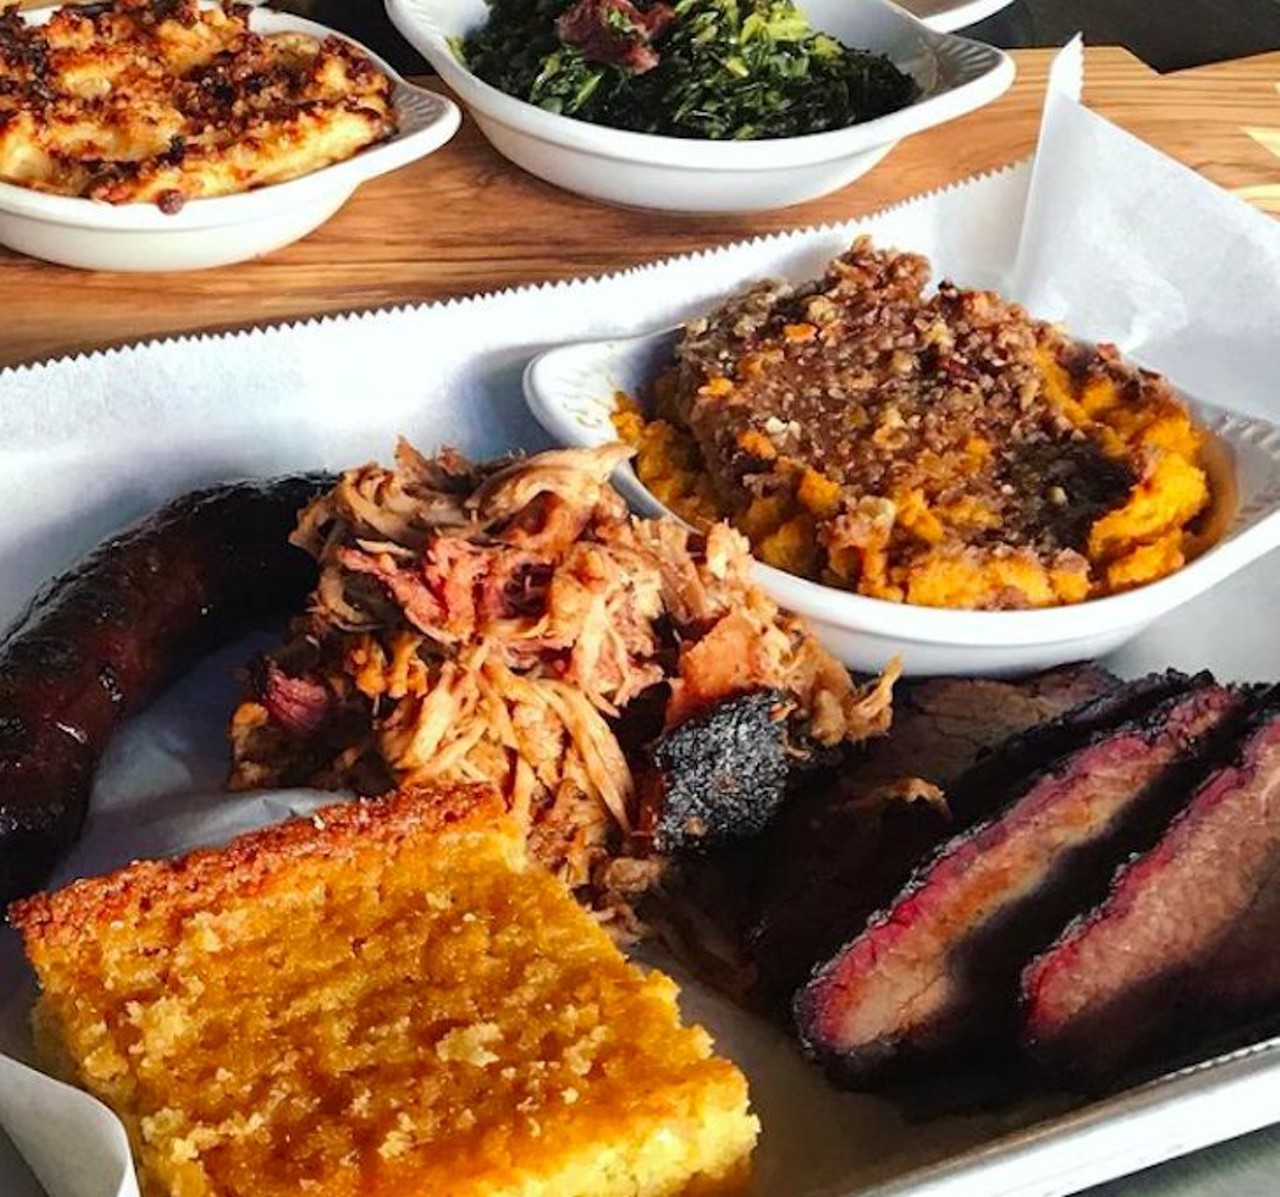 Smoke Street
424 N. Main St., Milford, 248-529-6464, smokestreetmilford.com
This barbecue spot is known for smoking its meats in-house for up to 12 hours, as well as its assortment of six sauces and 15 rotating draft beers.
Photo via Smoke Street/Instagram 